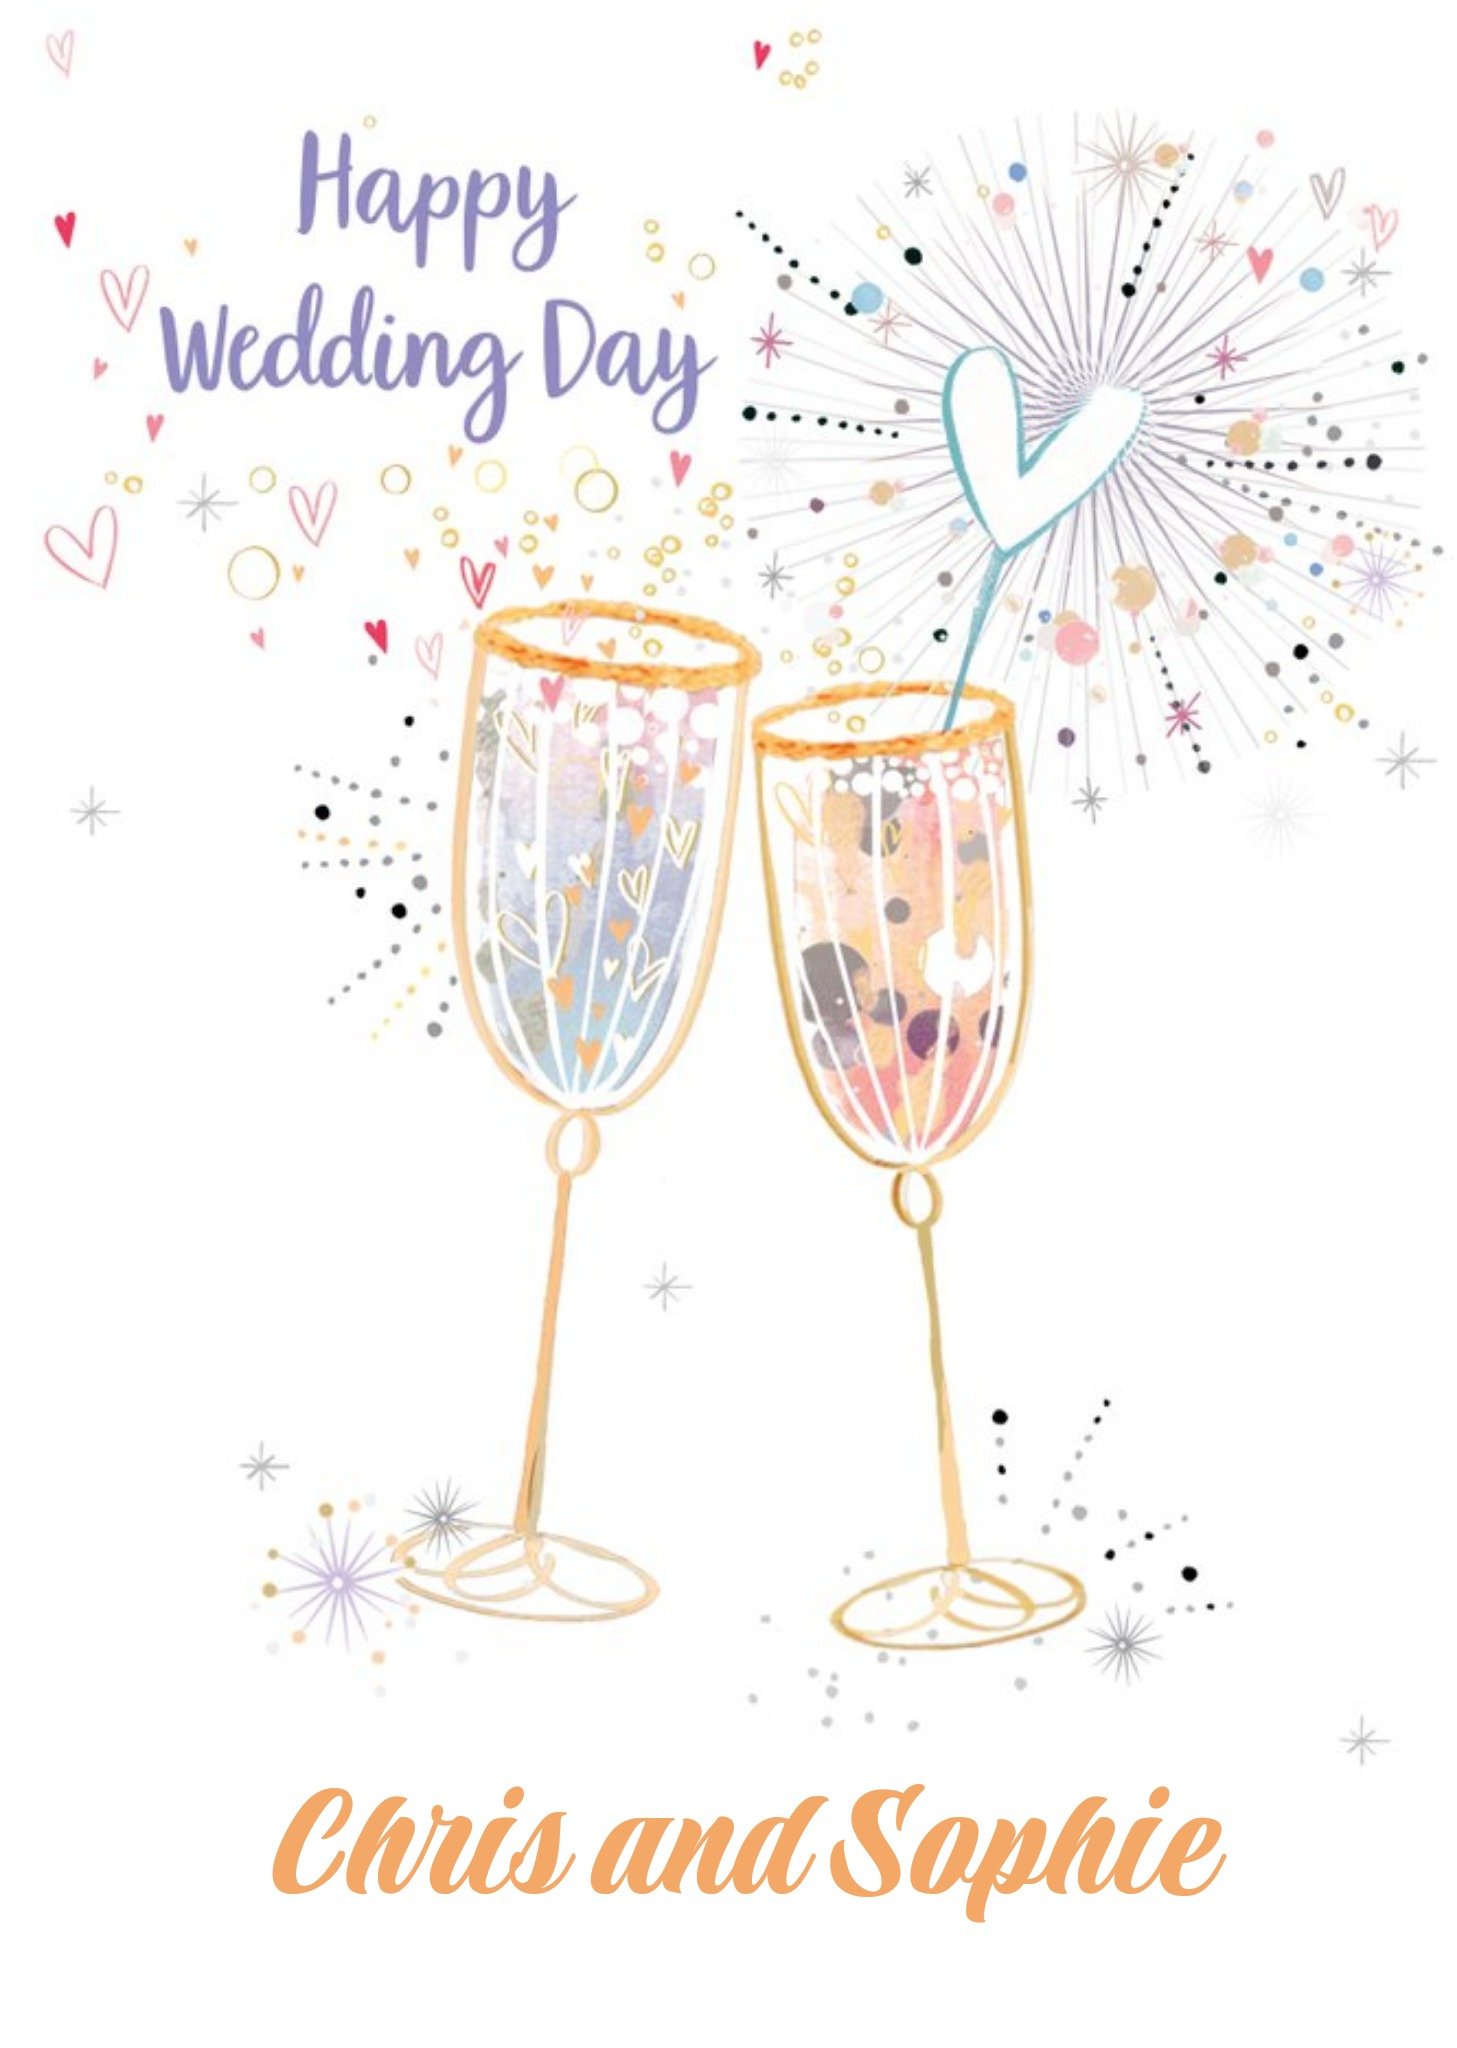 Moonpig Illustration Of Two Glasses Of Wine Surrounded By Sparkles And Hearts Wedding Day Card Ecard